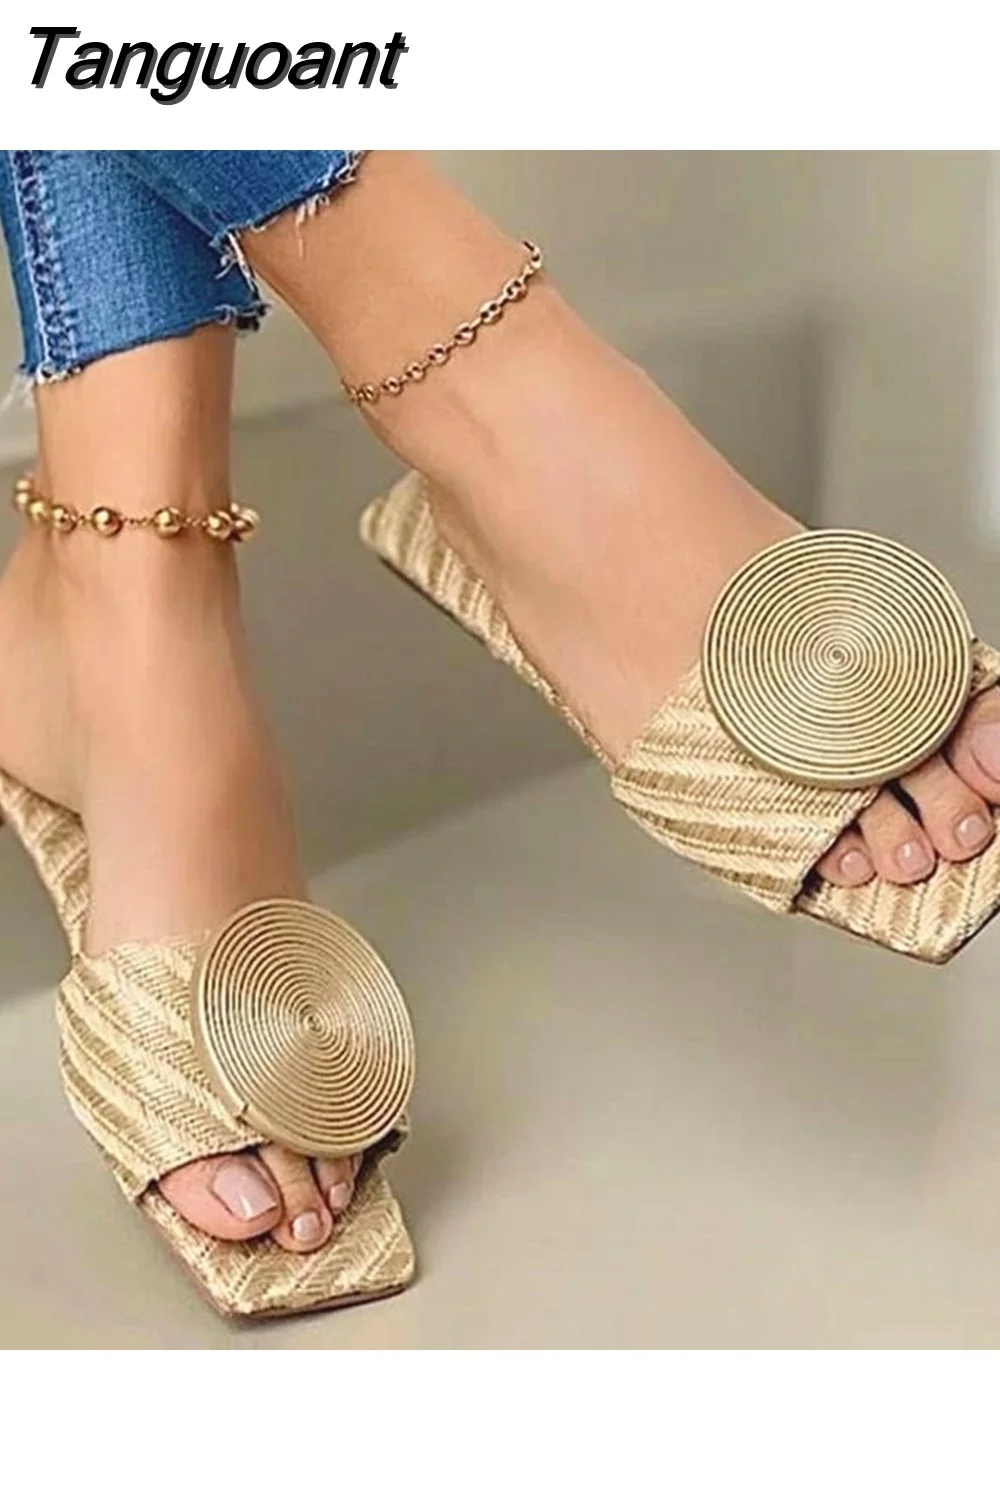 Tanguoant New Fashion Beach Shoes Woman Summer Flat Sandals Plus Size Round Buckle Solid Flats Female Casual Slippers Ladies Women